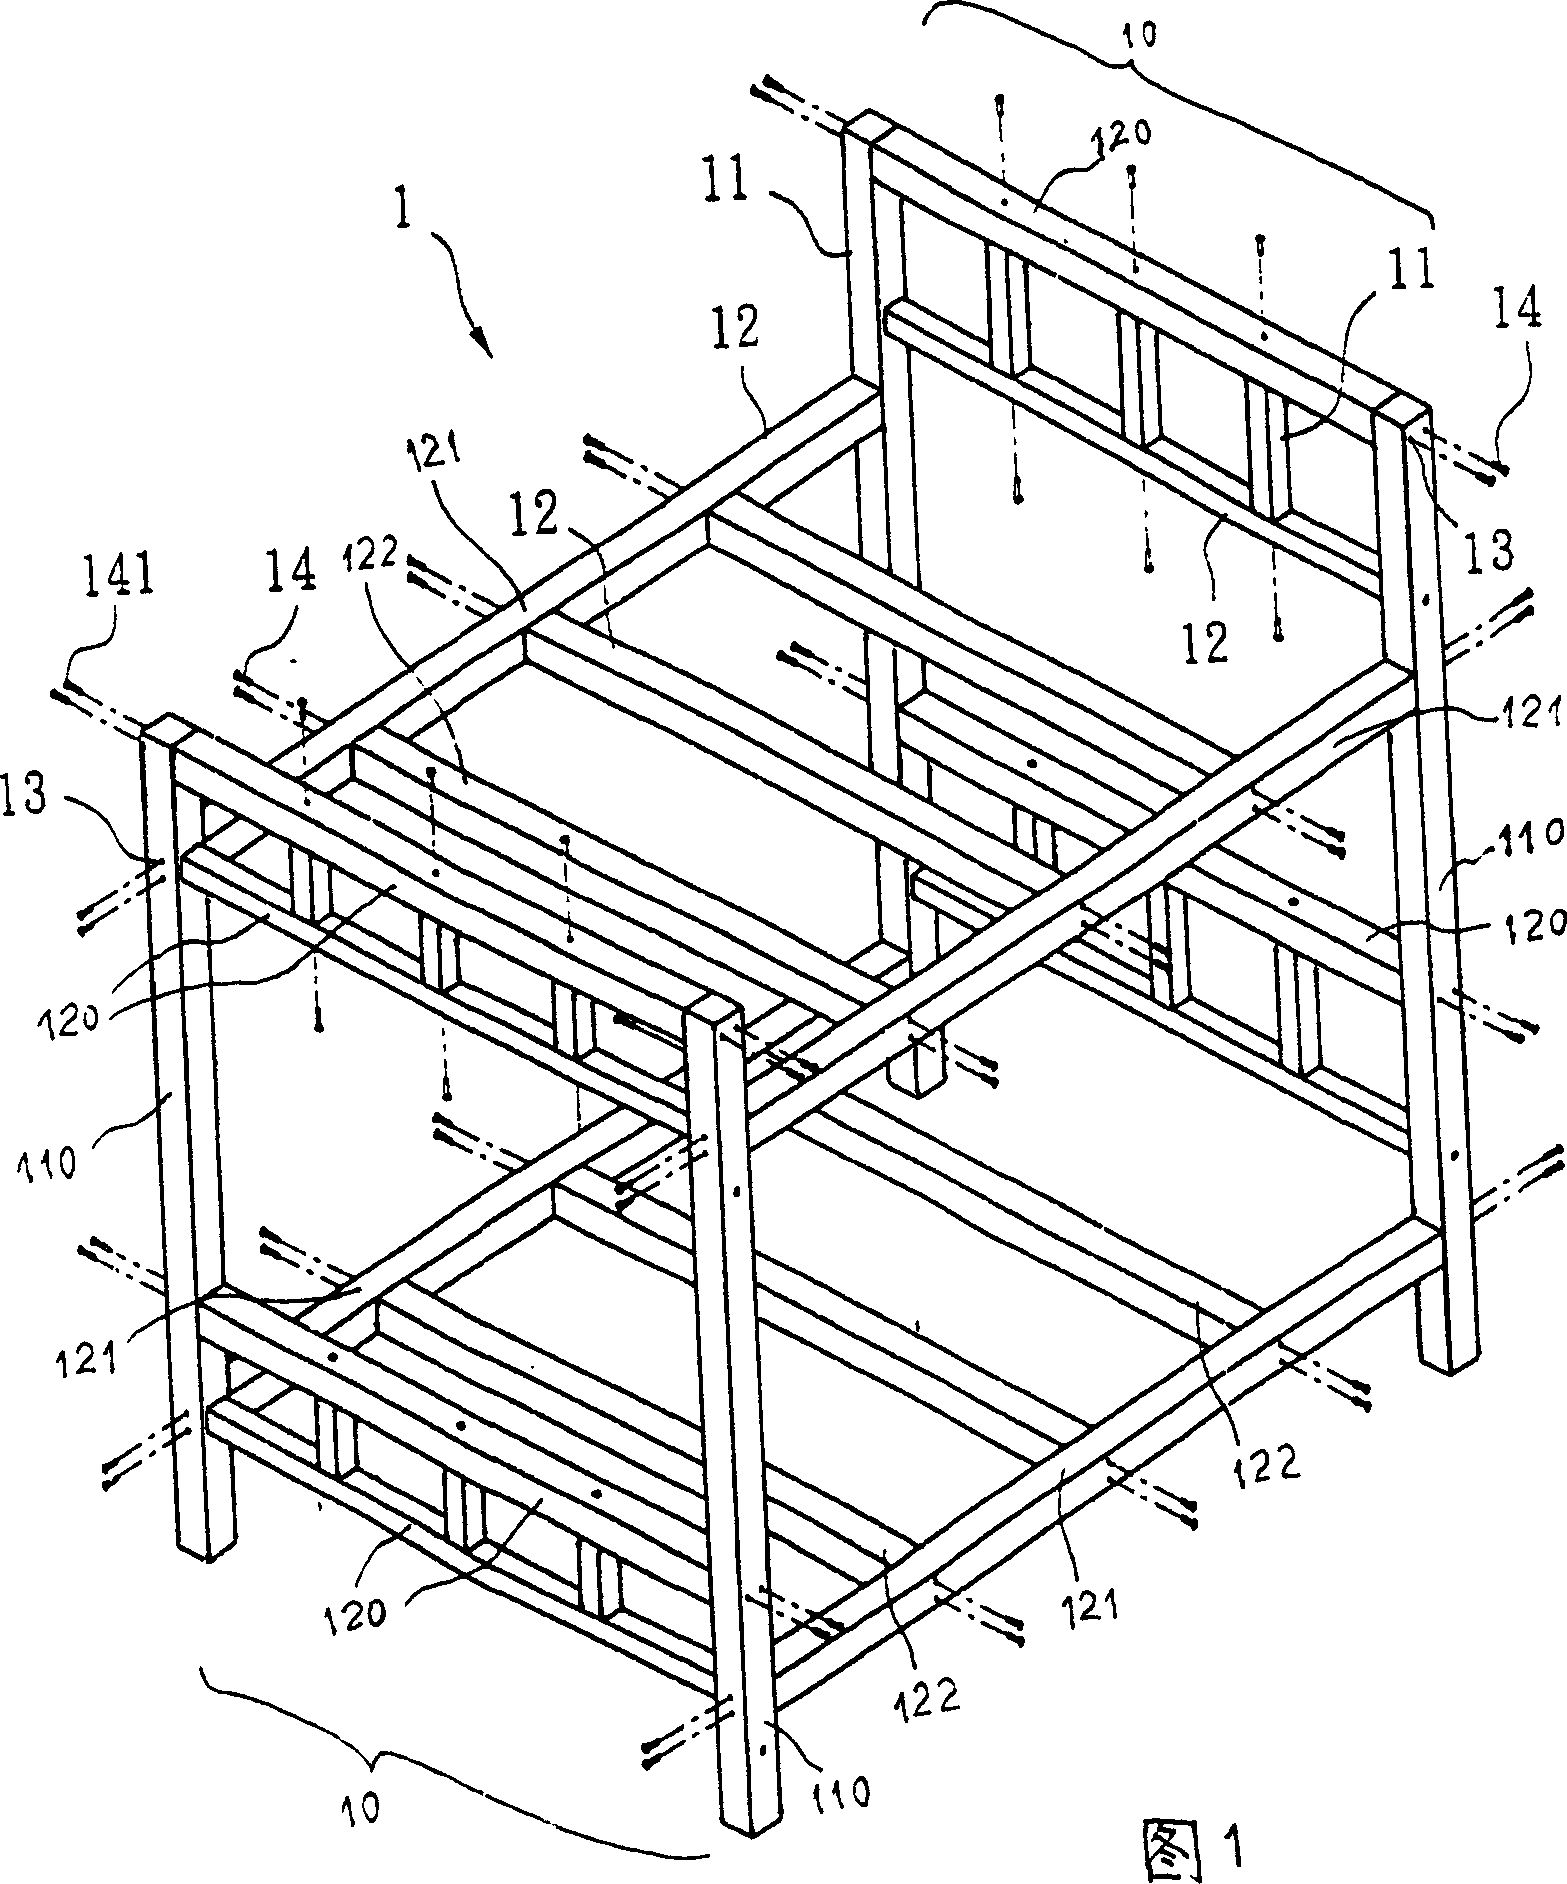 Embedded combined bedstead